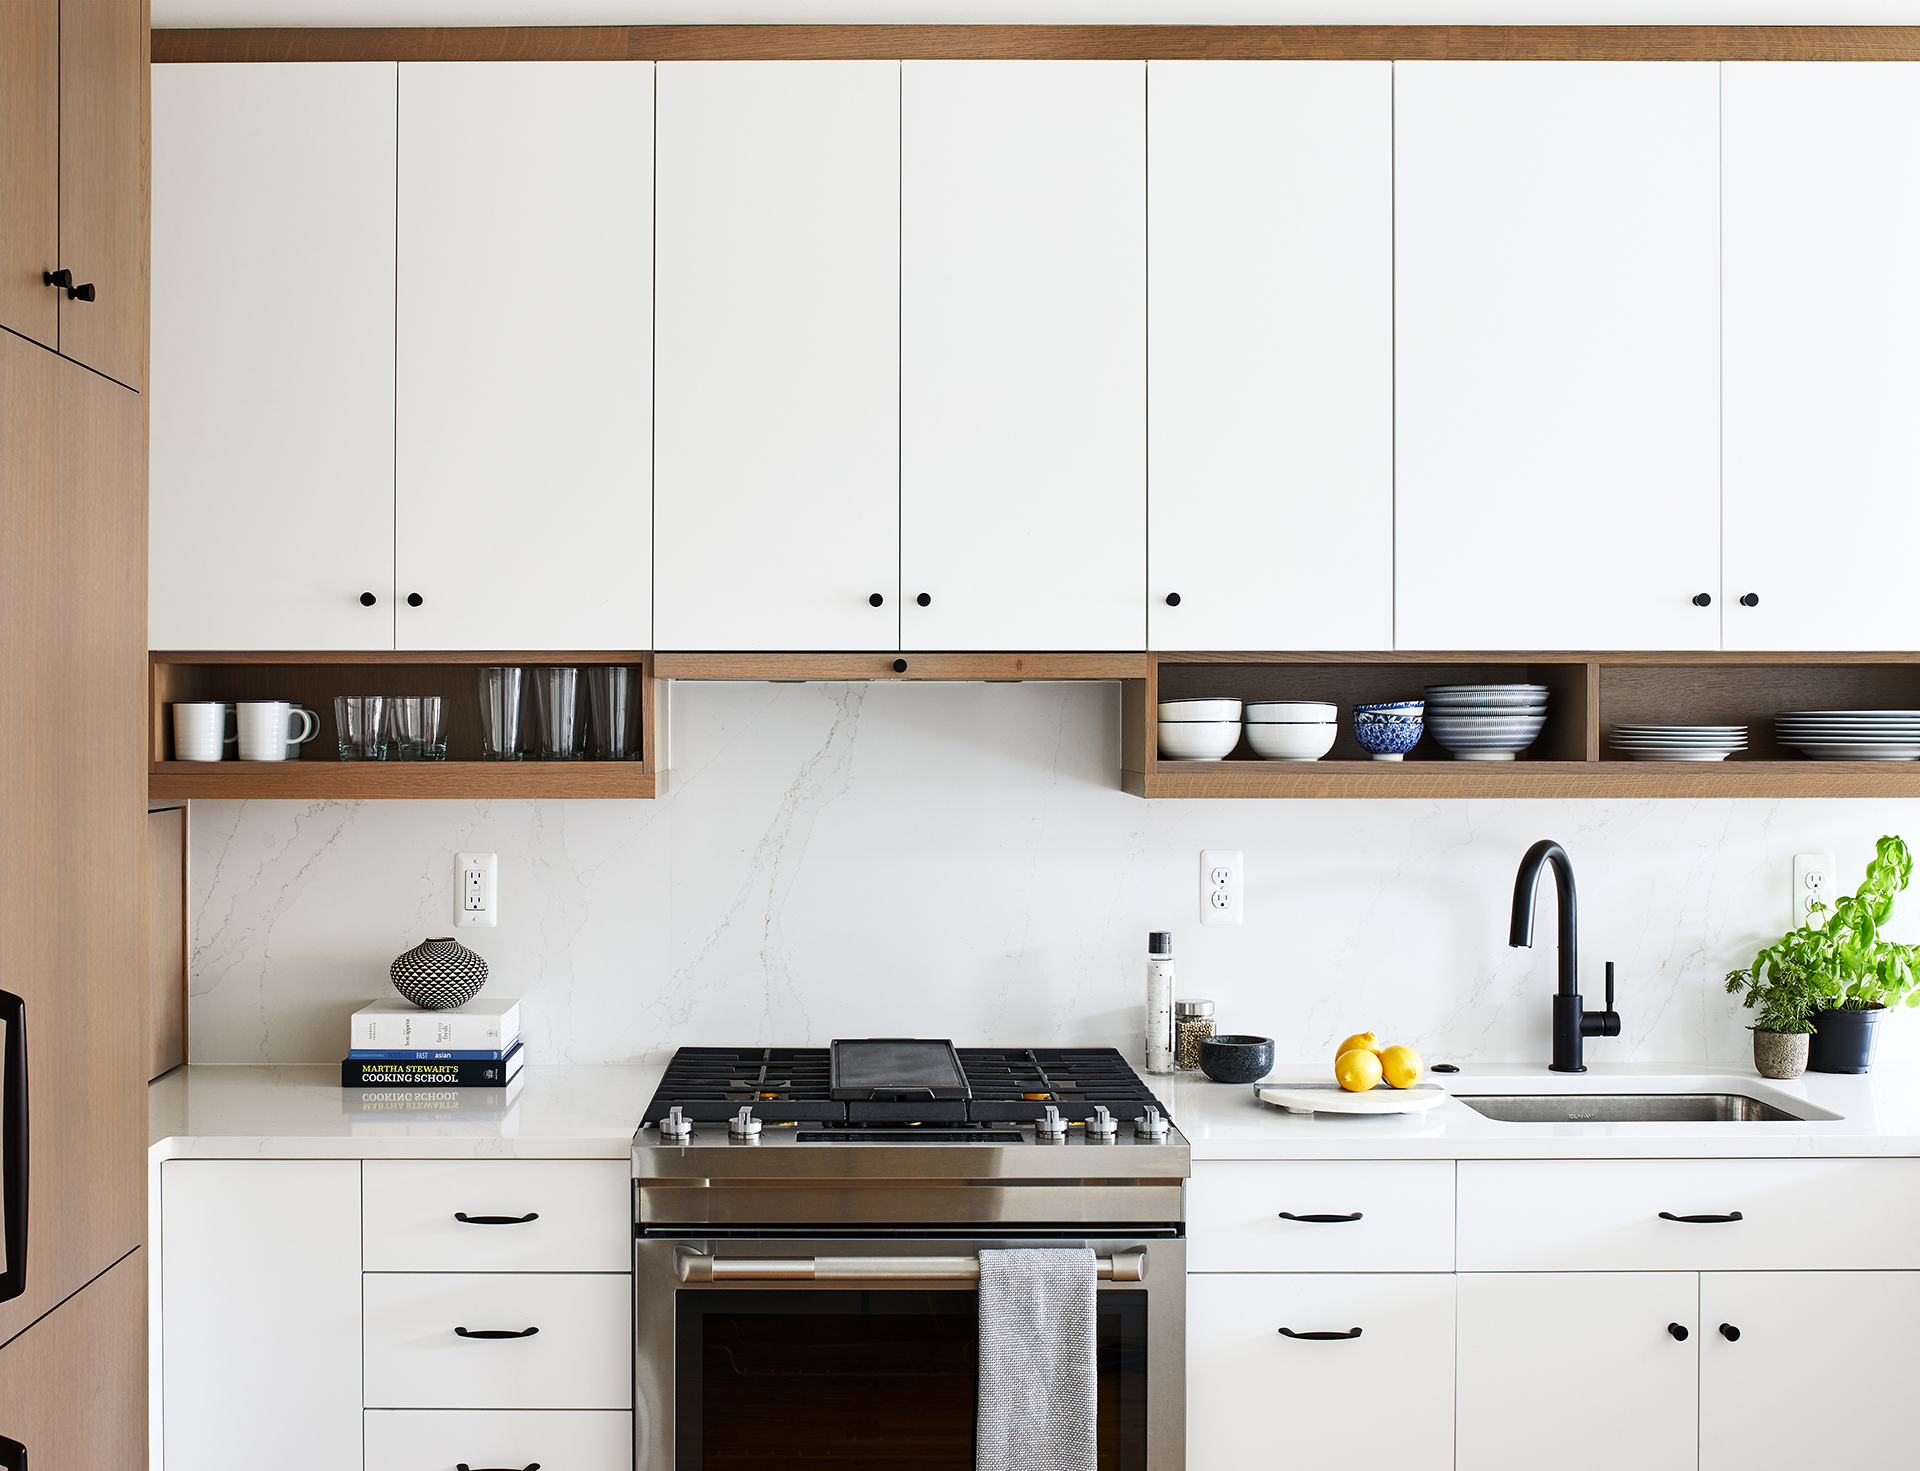 dc remodeling with white cabinets with black knobs and hanging shelves